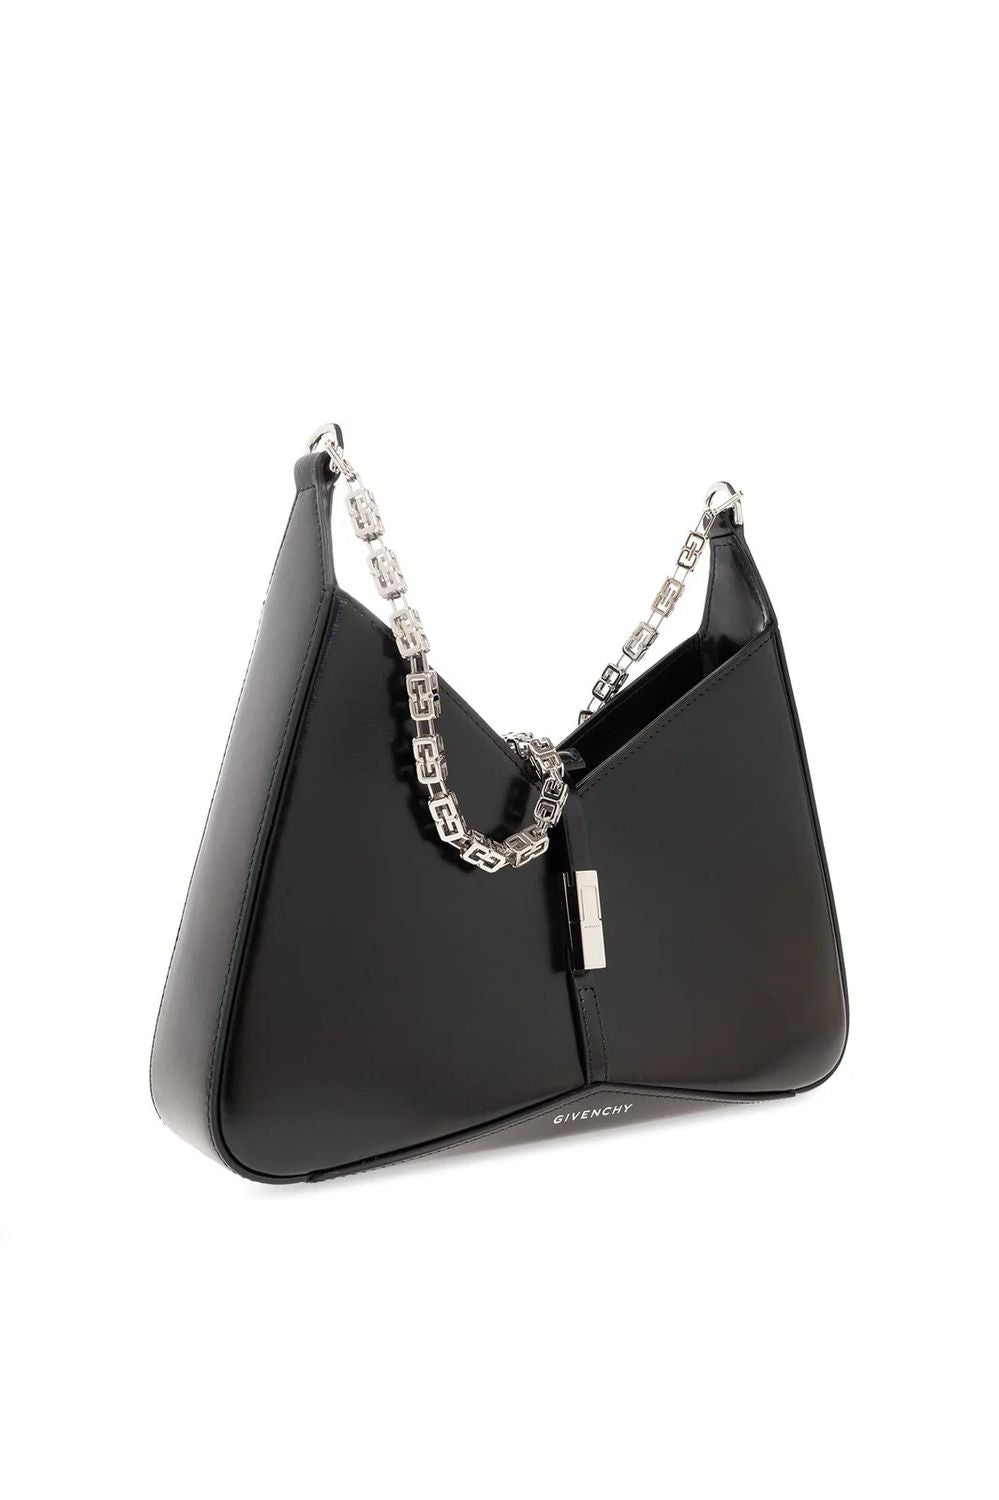 Shop Givenchy Sophisticated And Chic Black Leather Shoulder Bag For Women